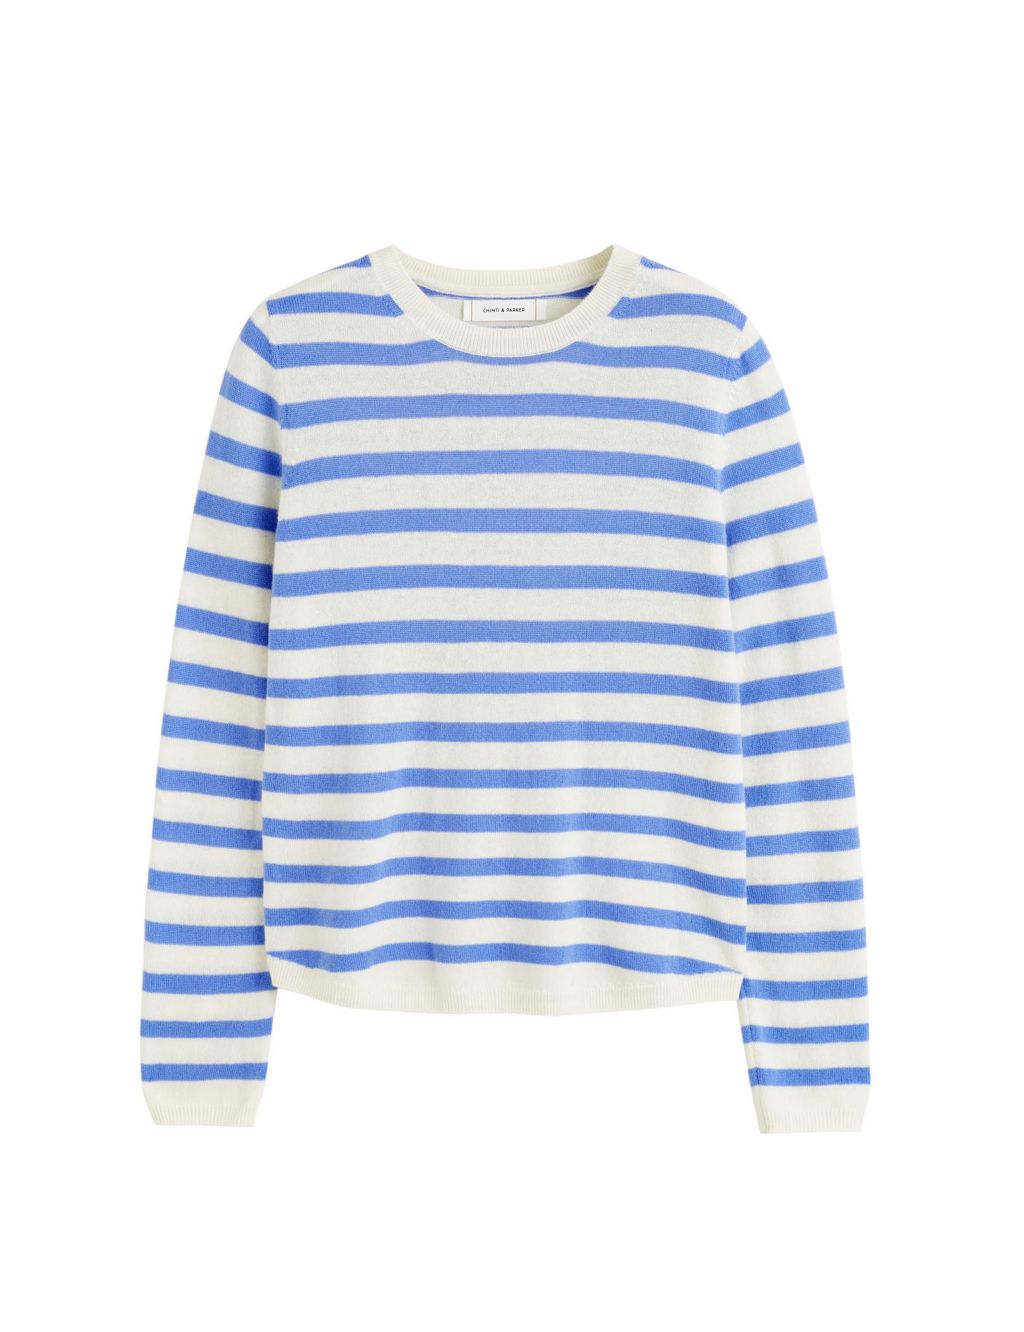 Wool Rich Striped Sweatshirt with Cashmere image 2